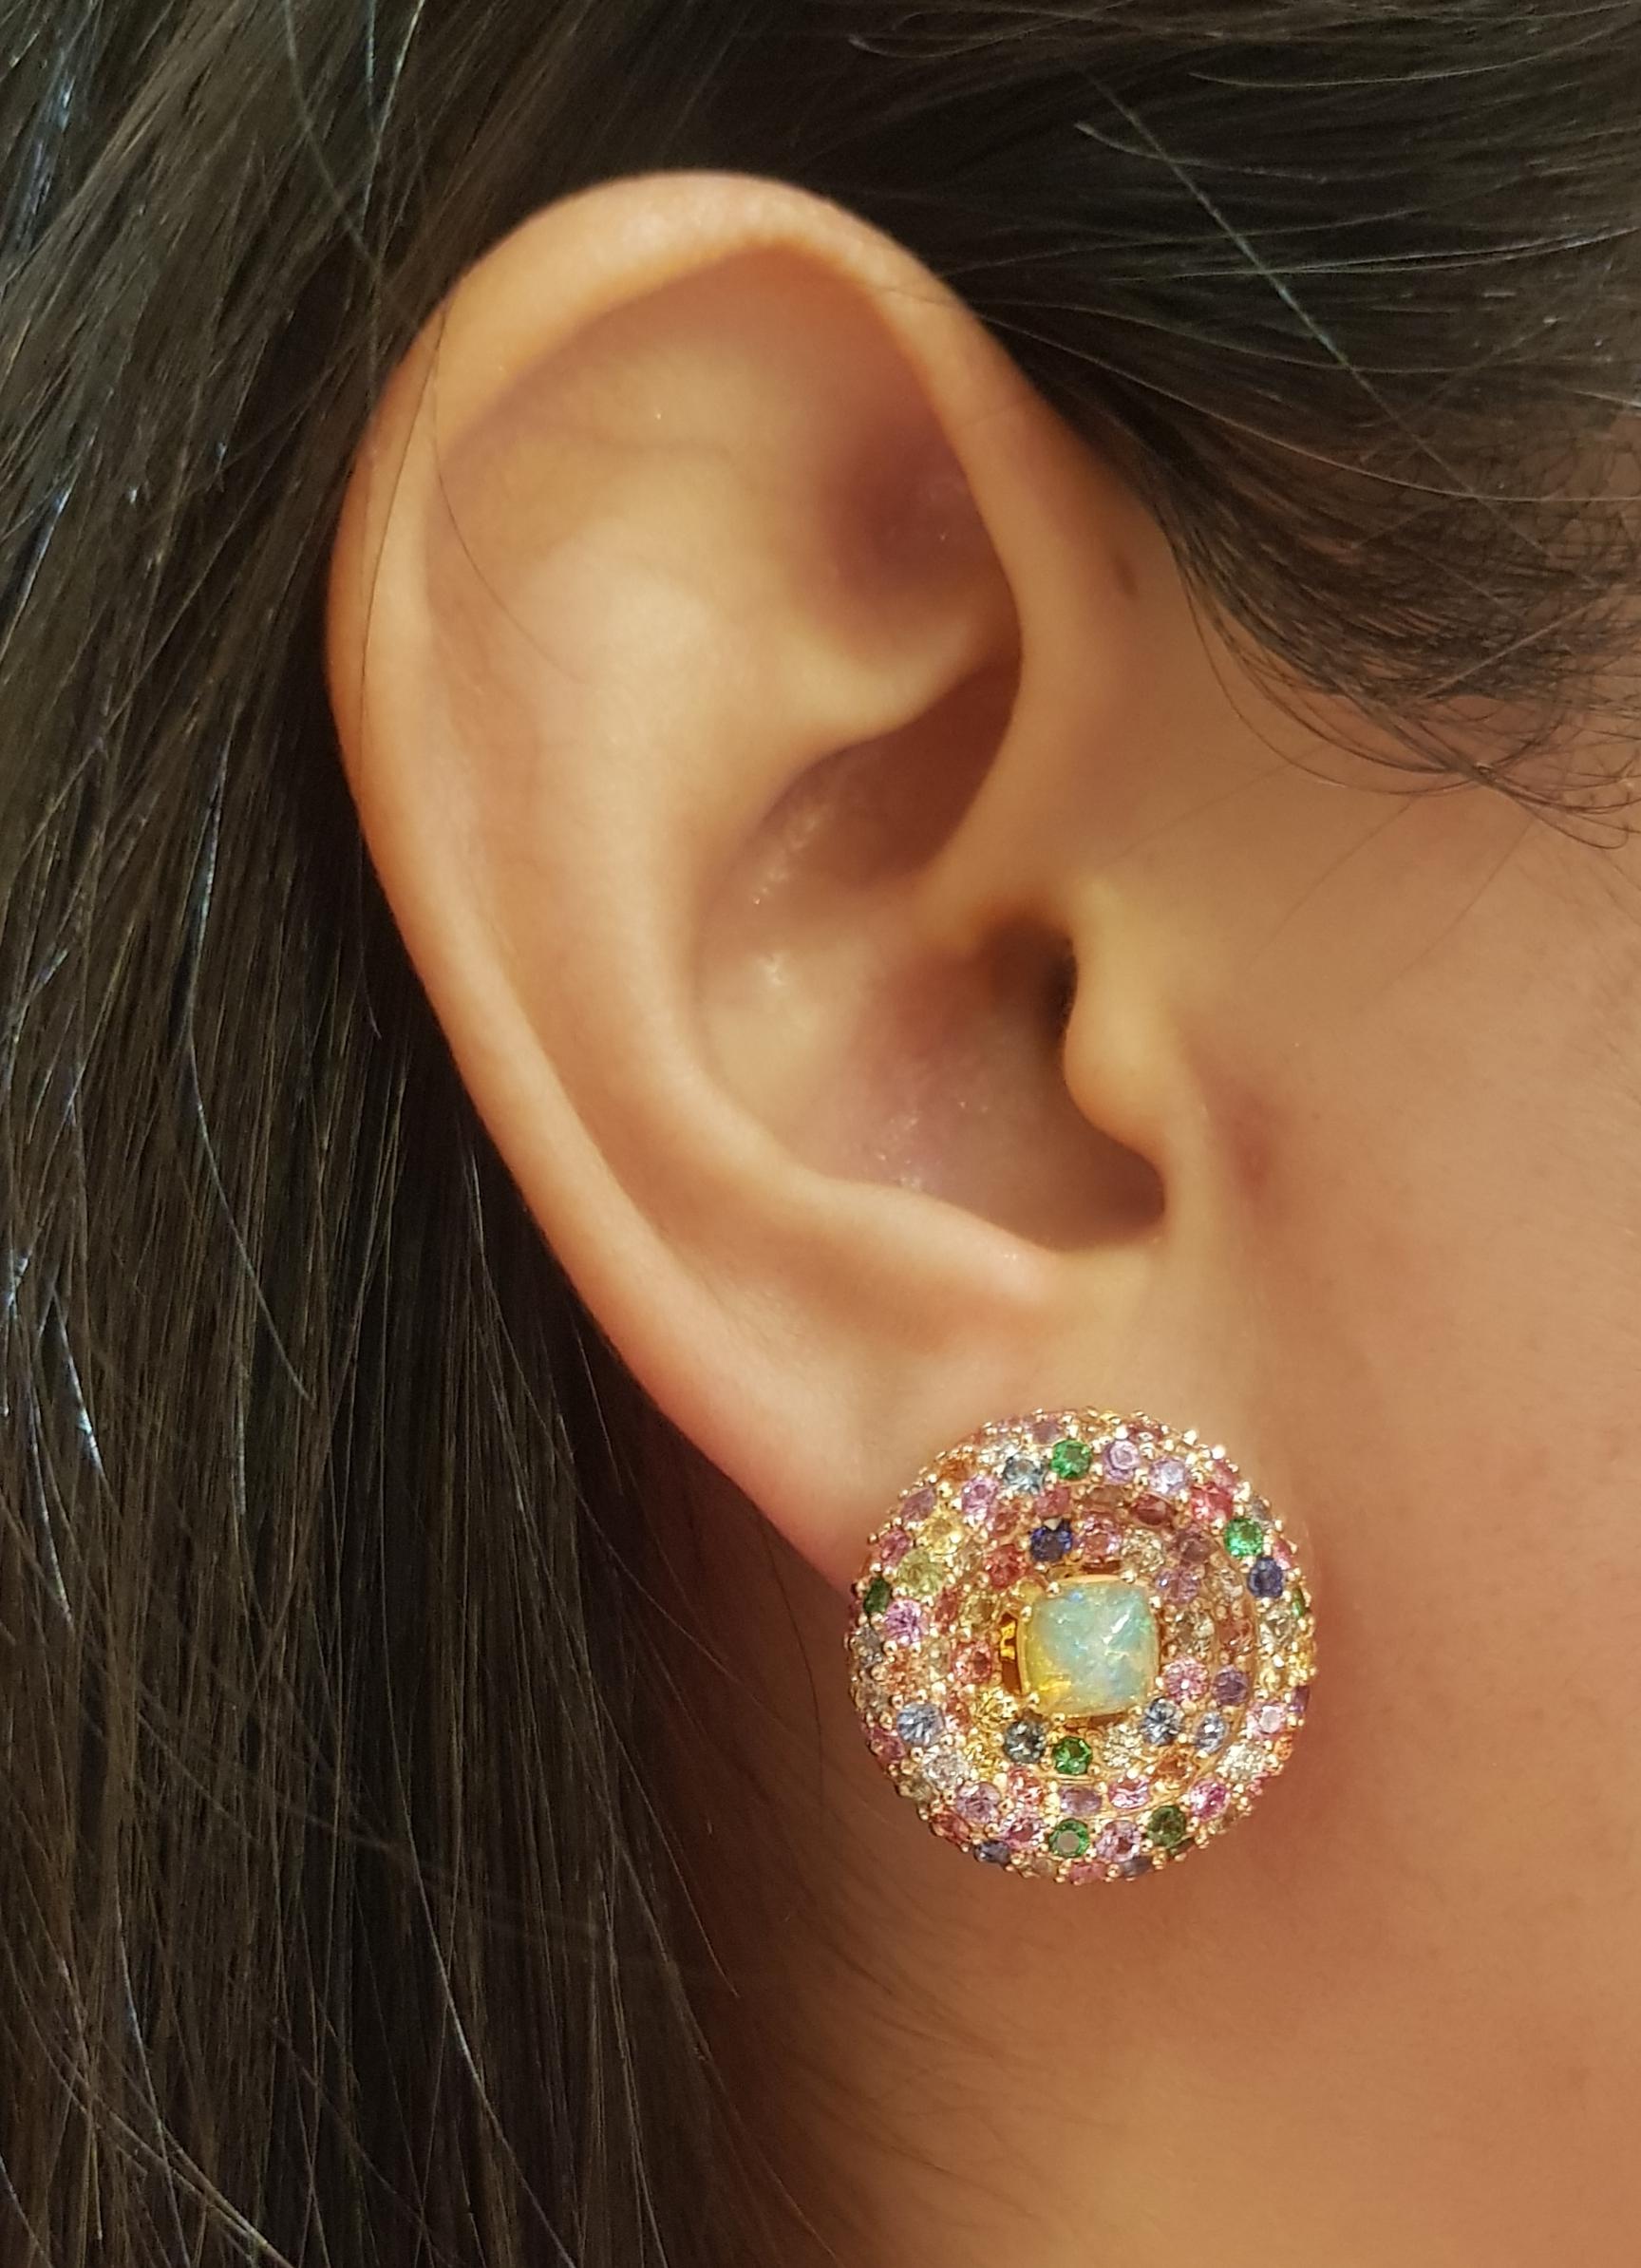 Opal 1.59 carats, Rainbow Colour Sapphire 10.04 carats and Diamond 1.07 carats Earring set in 18K Rose Gold Settings

Width: 2.0 cm 
Length: 2.0 cm
Total Weight: 19.58 grams

